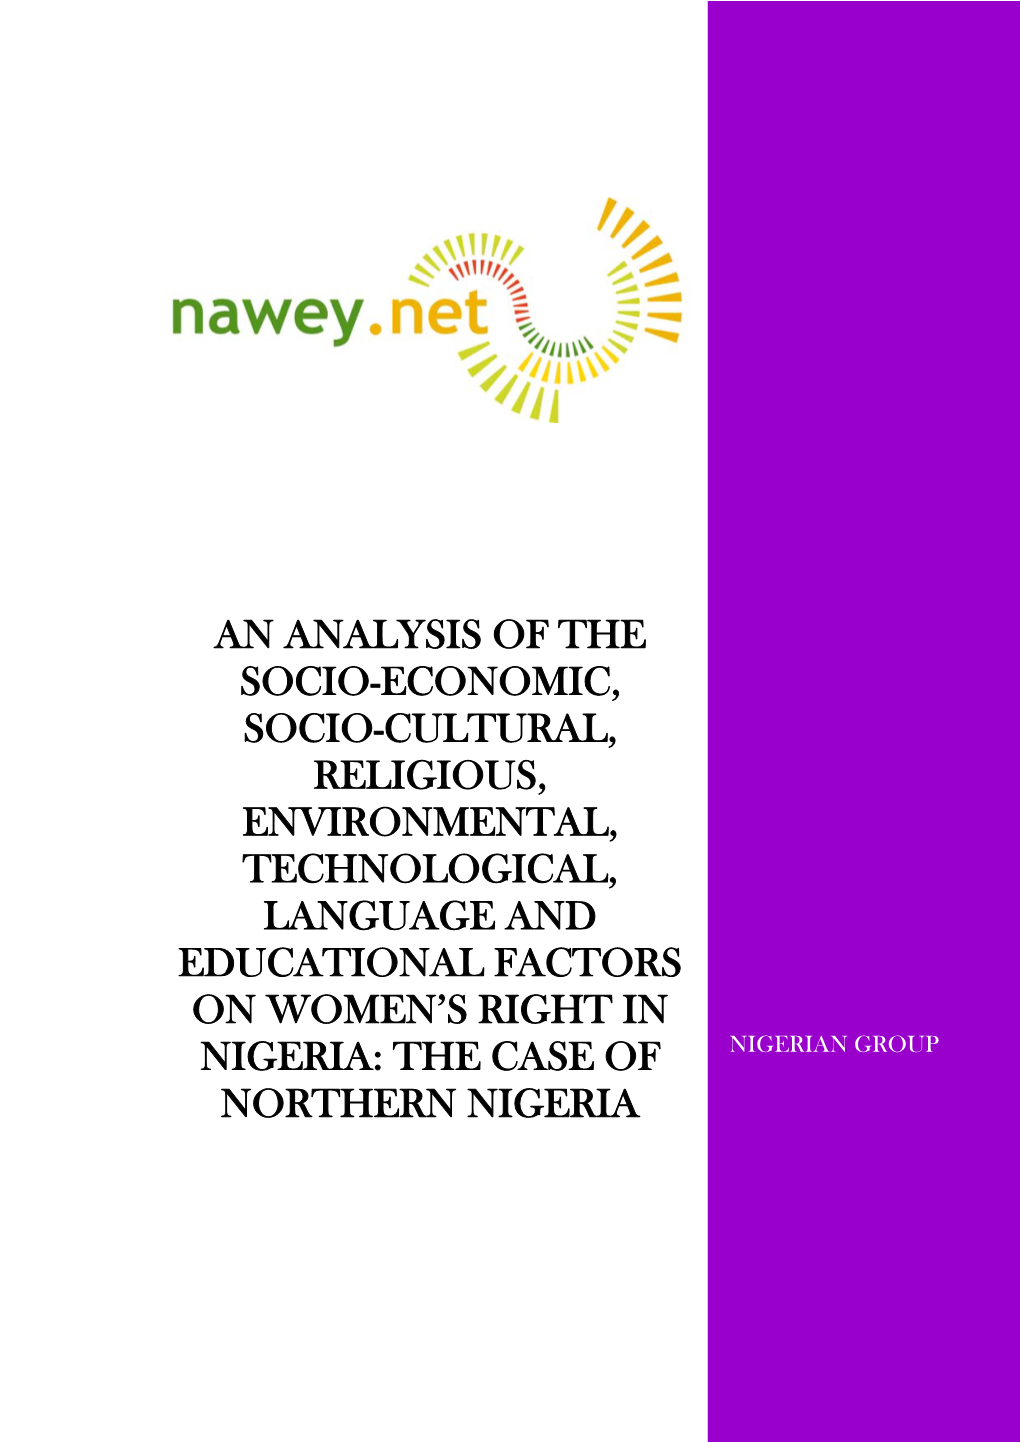 An Analysis of the Socio-Economic, Socio-Cultural, Religious, Environmental, Technological, Language and Educational Factors On